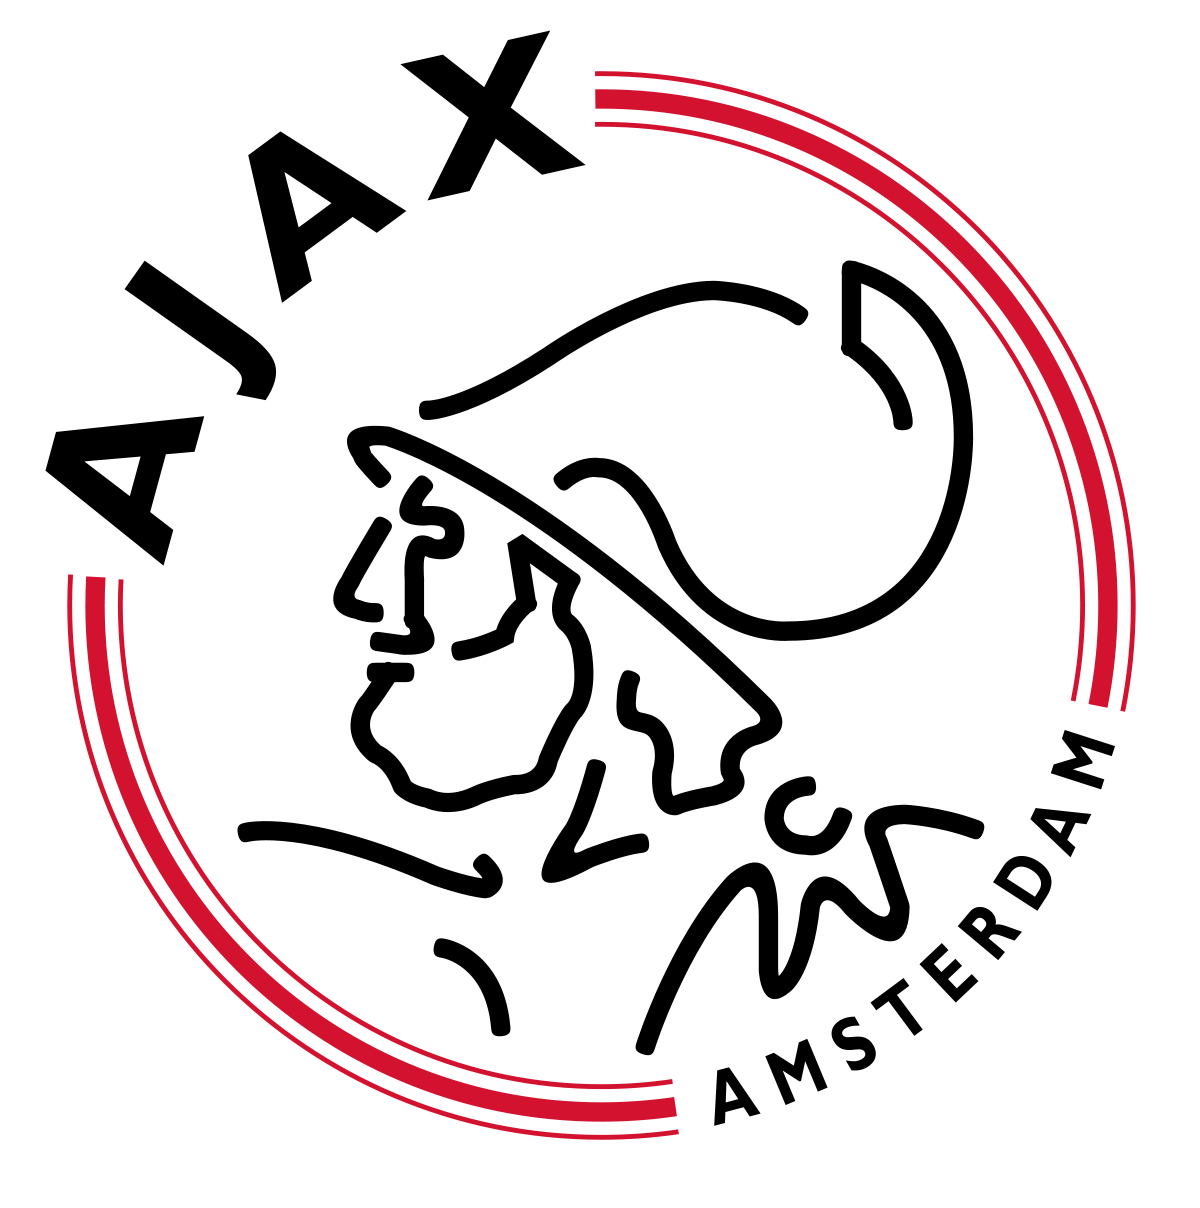 AJAX PLAYING SYSTEM AND COACHING SESSION. PDF